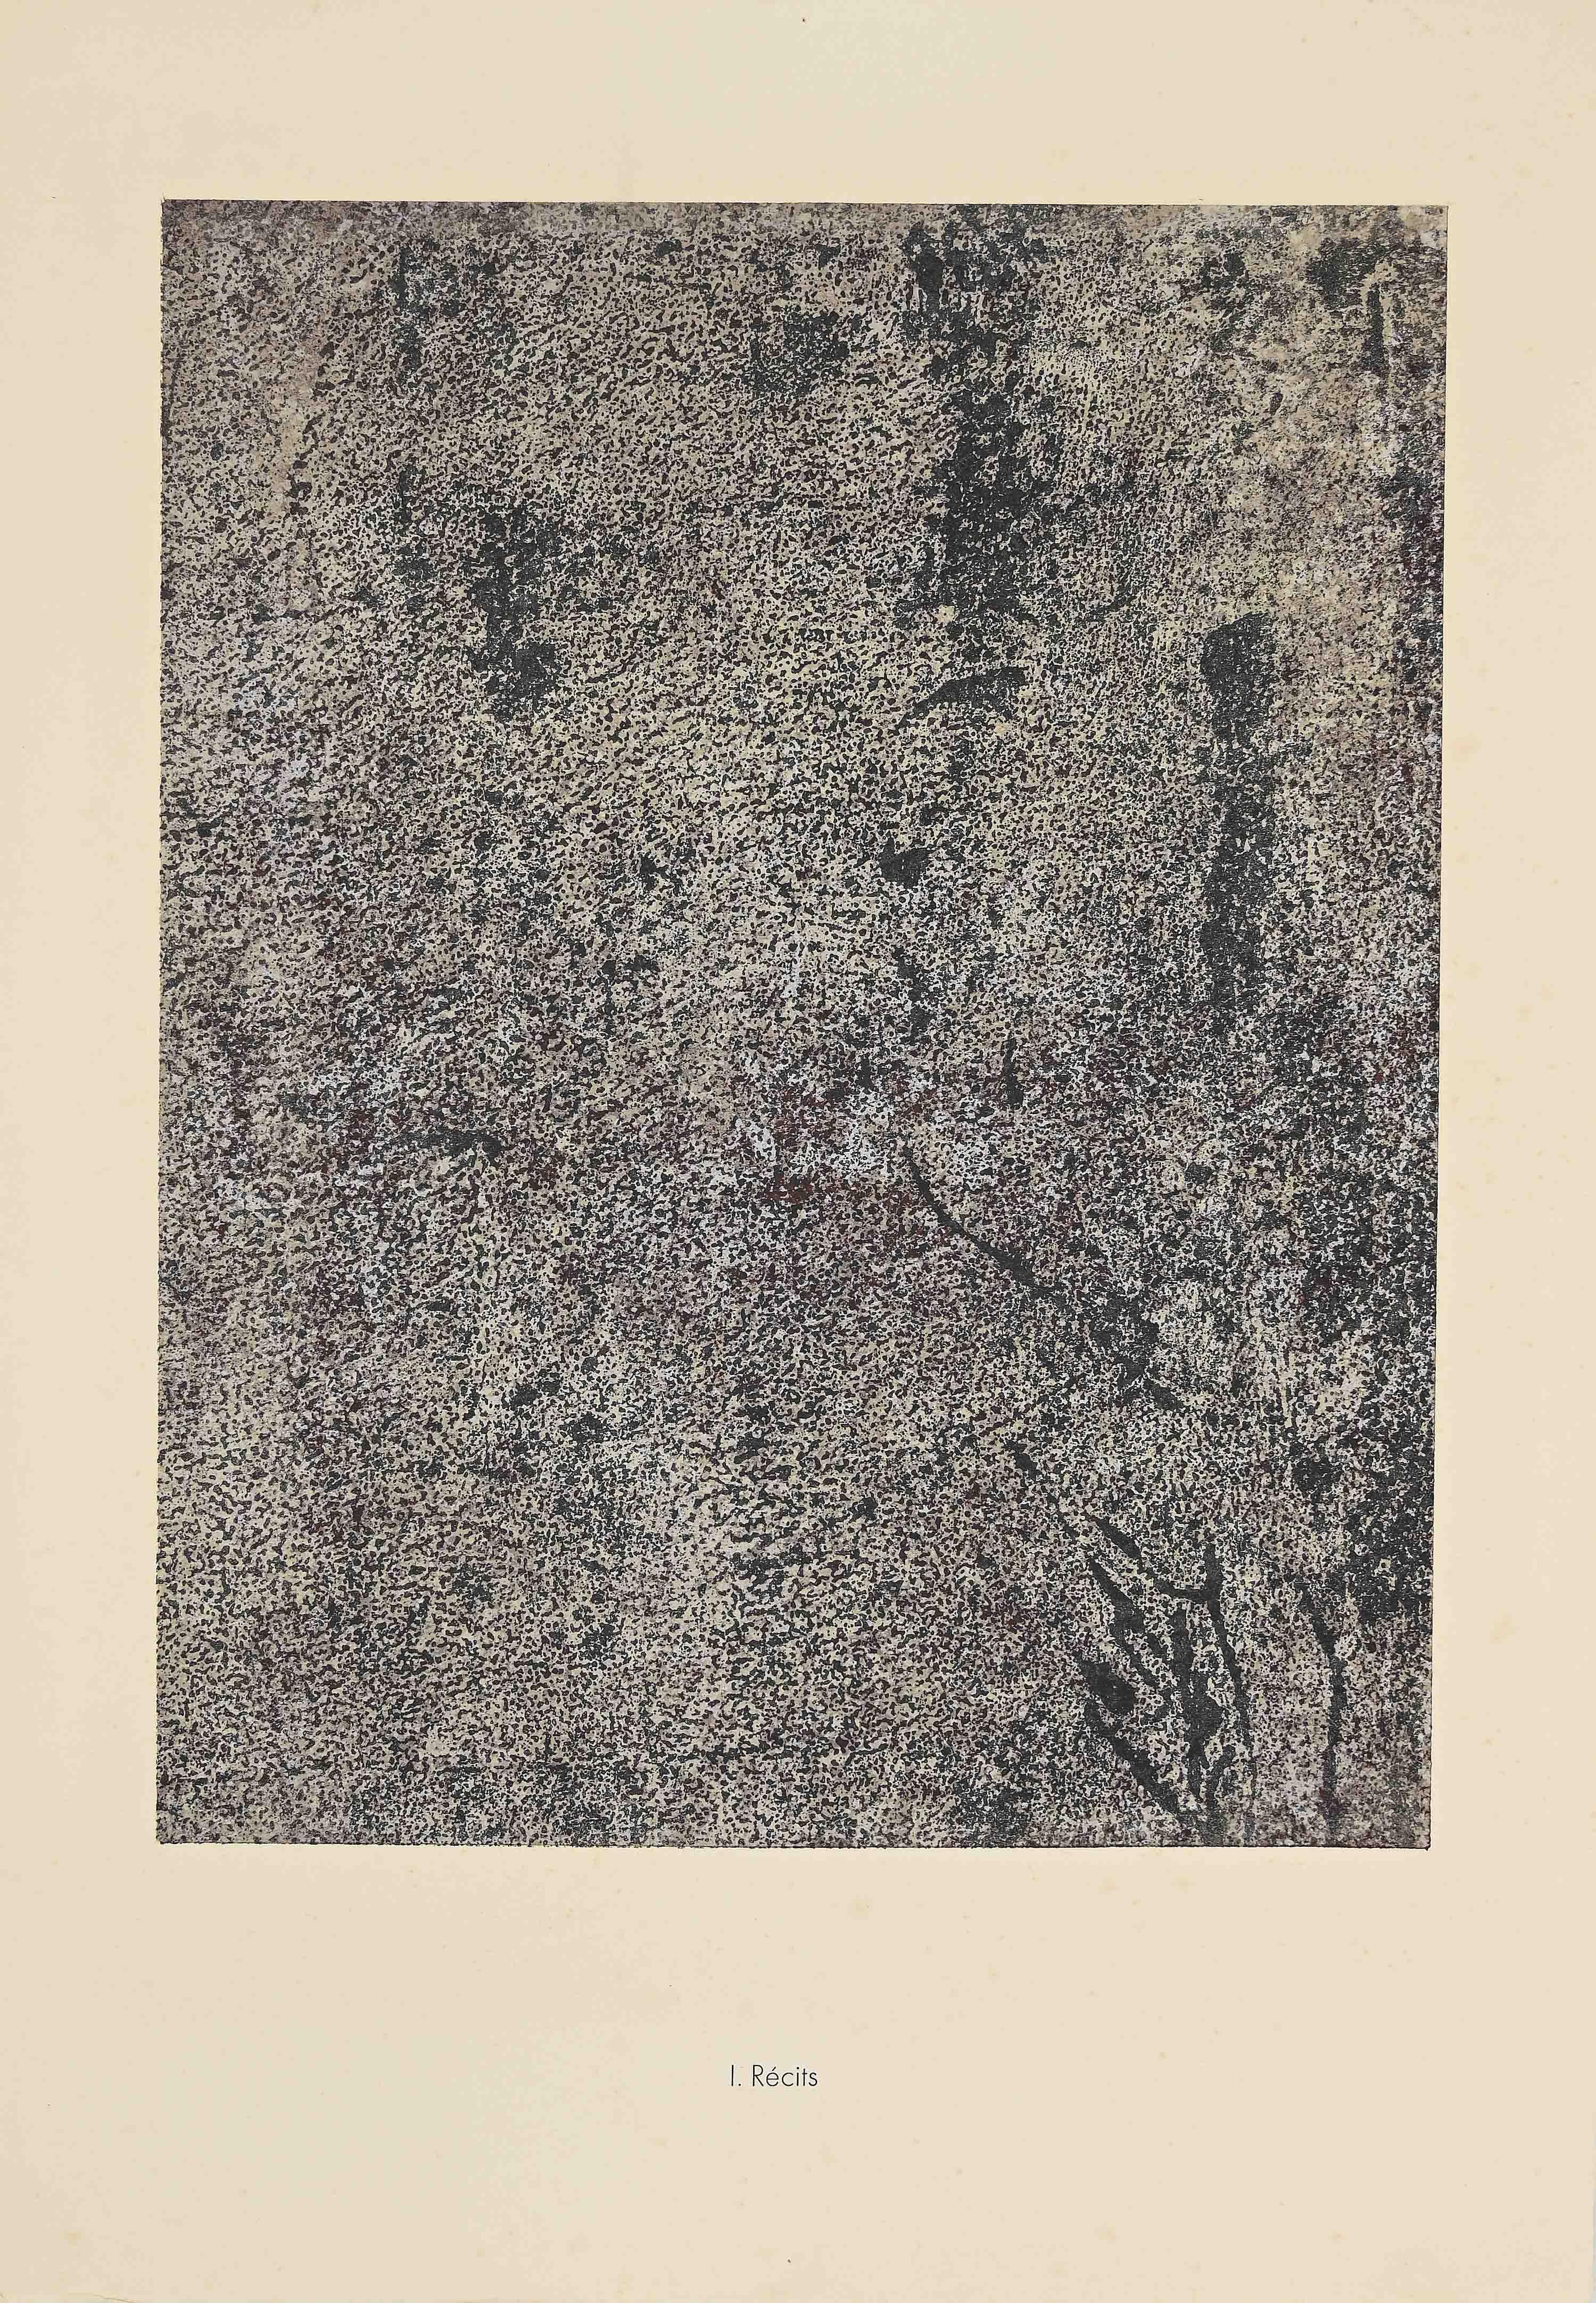 Recits is an original lithograph on watermarked paper "Arc". Abstract composition by the French artist Jean Dubuffet. From the album of "Anarchitecte" (1953-1959).
In excellent conditions.

Image Dimensions: 45 x 35 cm

Referements: Cat. Silkeborg